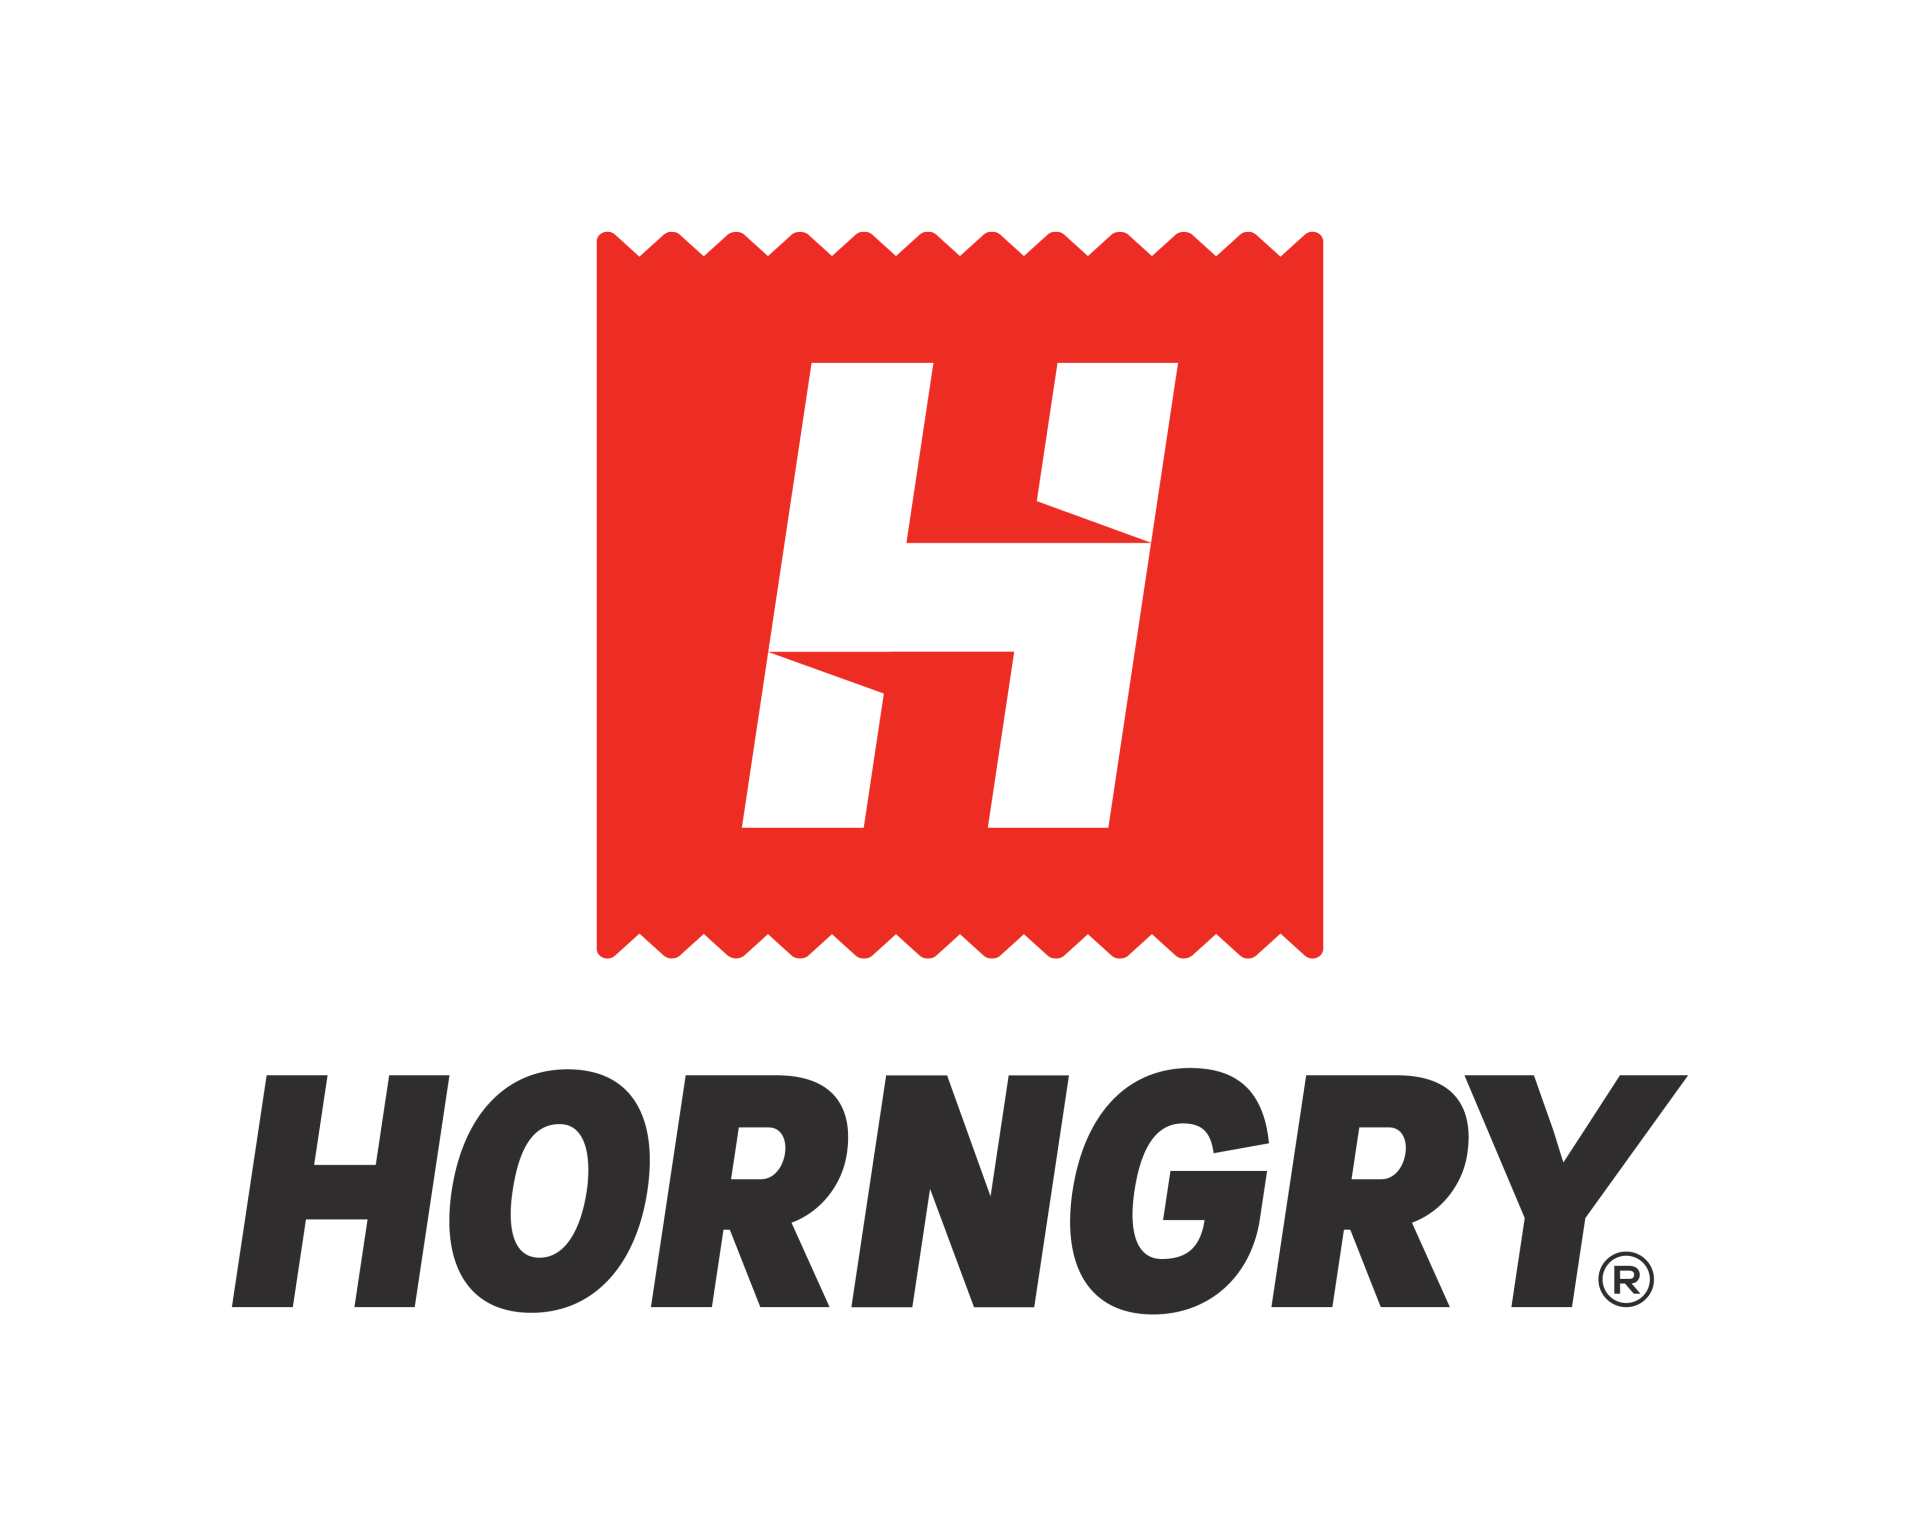 HORNGRY - Action & Extreme Sports Gear - Values and Ethics Statement